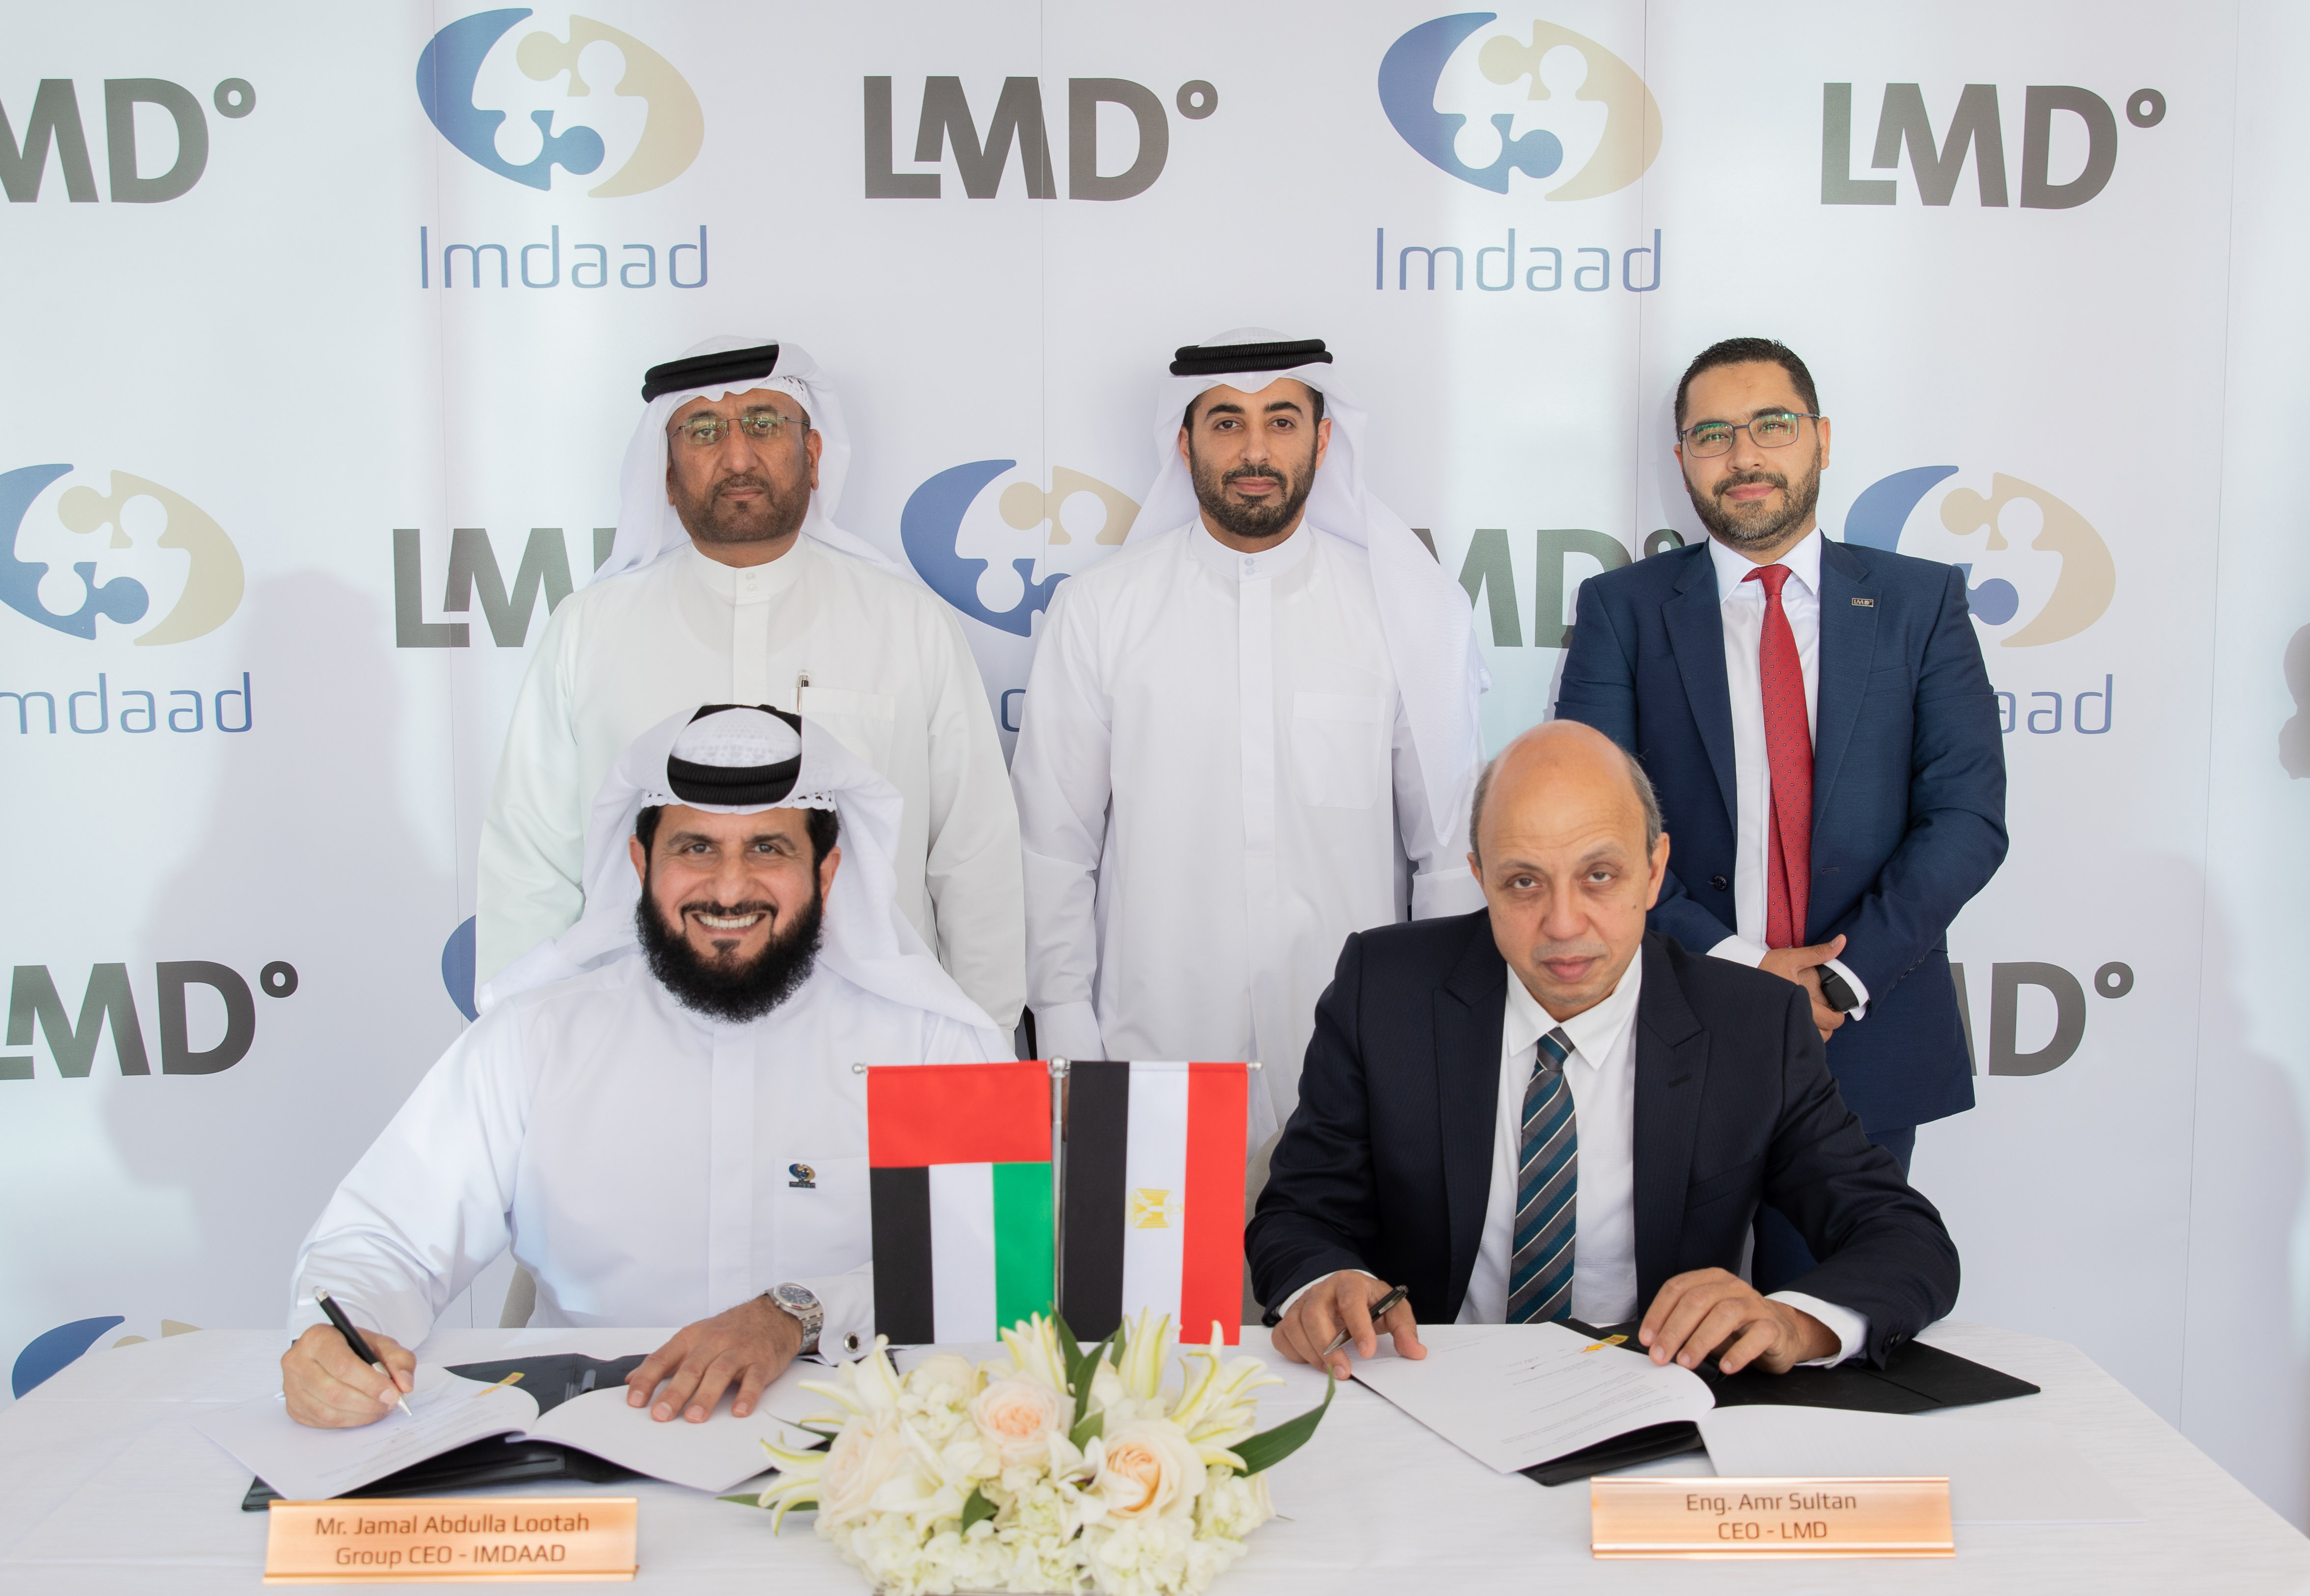 Imdaad expands its regional footprint into Egypt through new joint venture with LMD